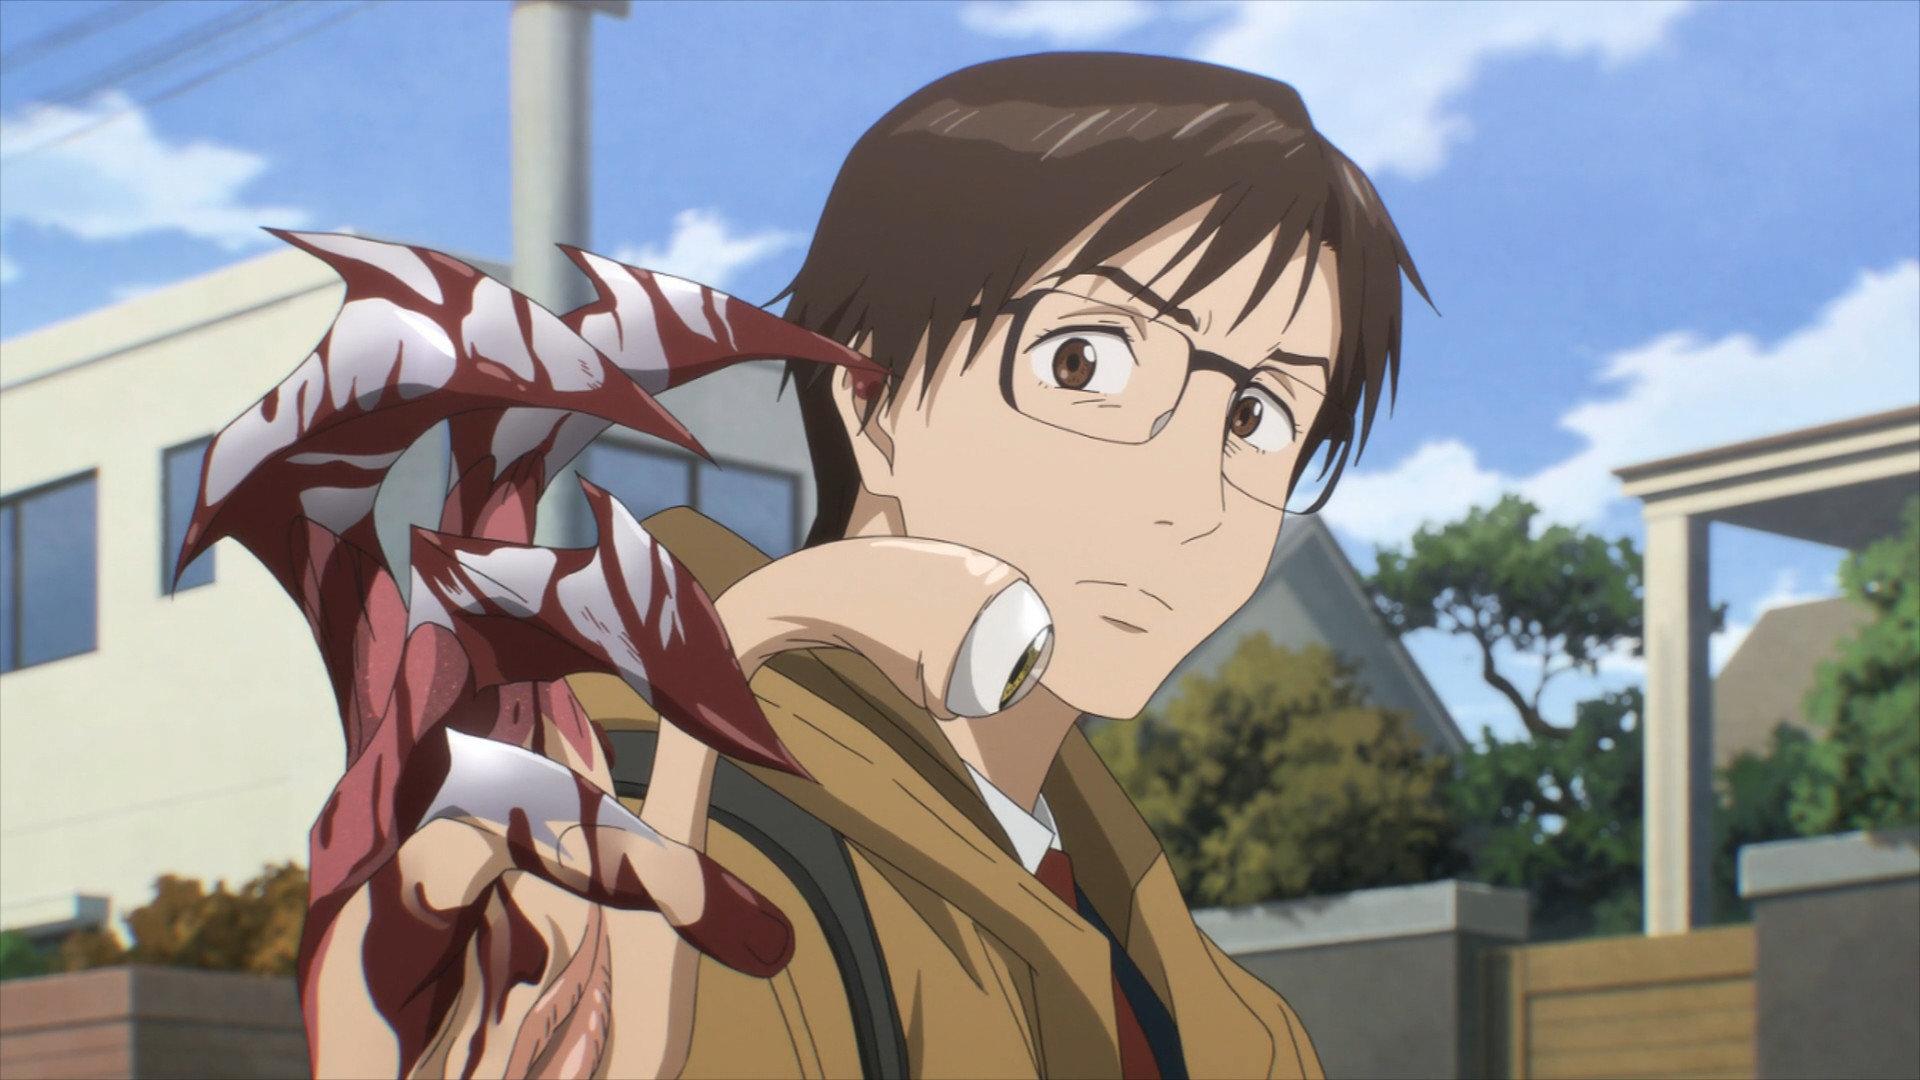 Parasyte Wallpapers - Top Free Parasyte Backgrounds ...